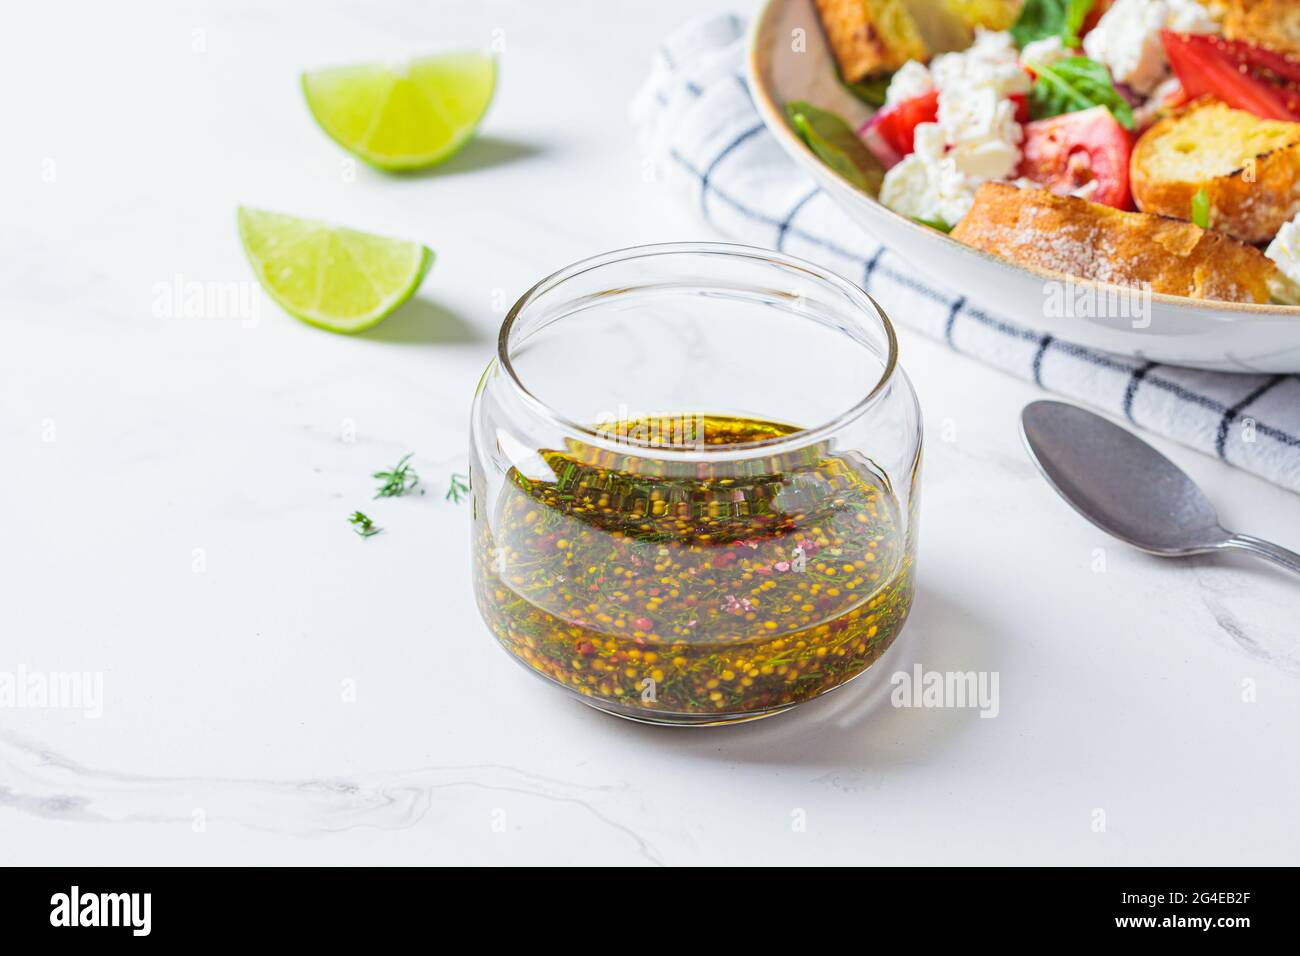 Mustard, olive oil and dill salad dressing in a glass jar. Cooking healthy food concept. Stock Photo